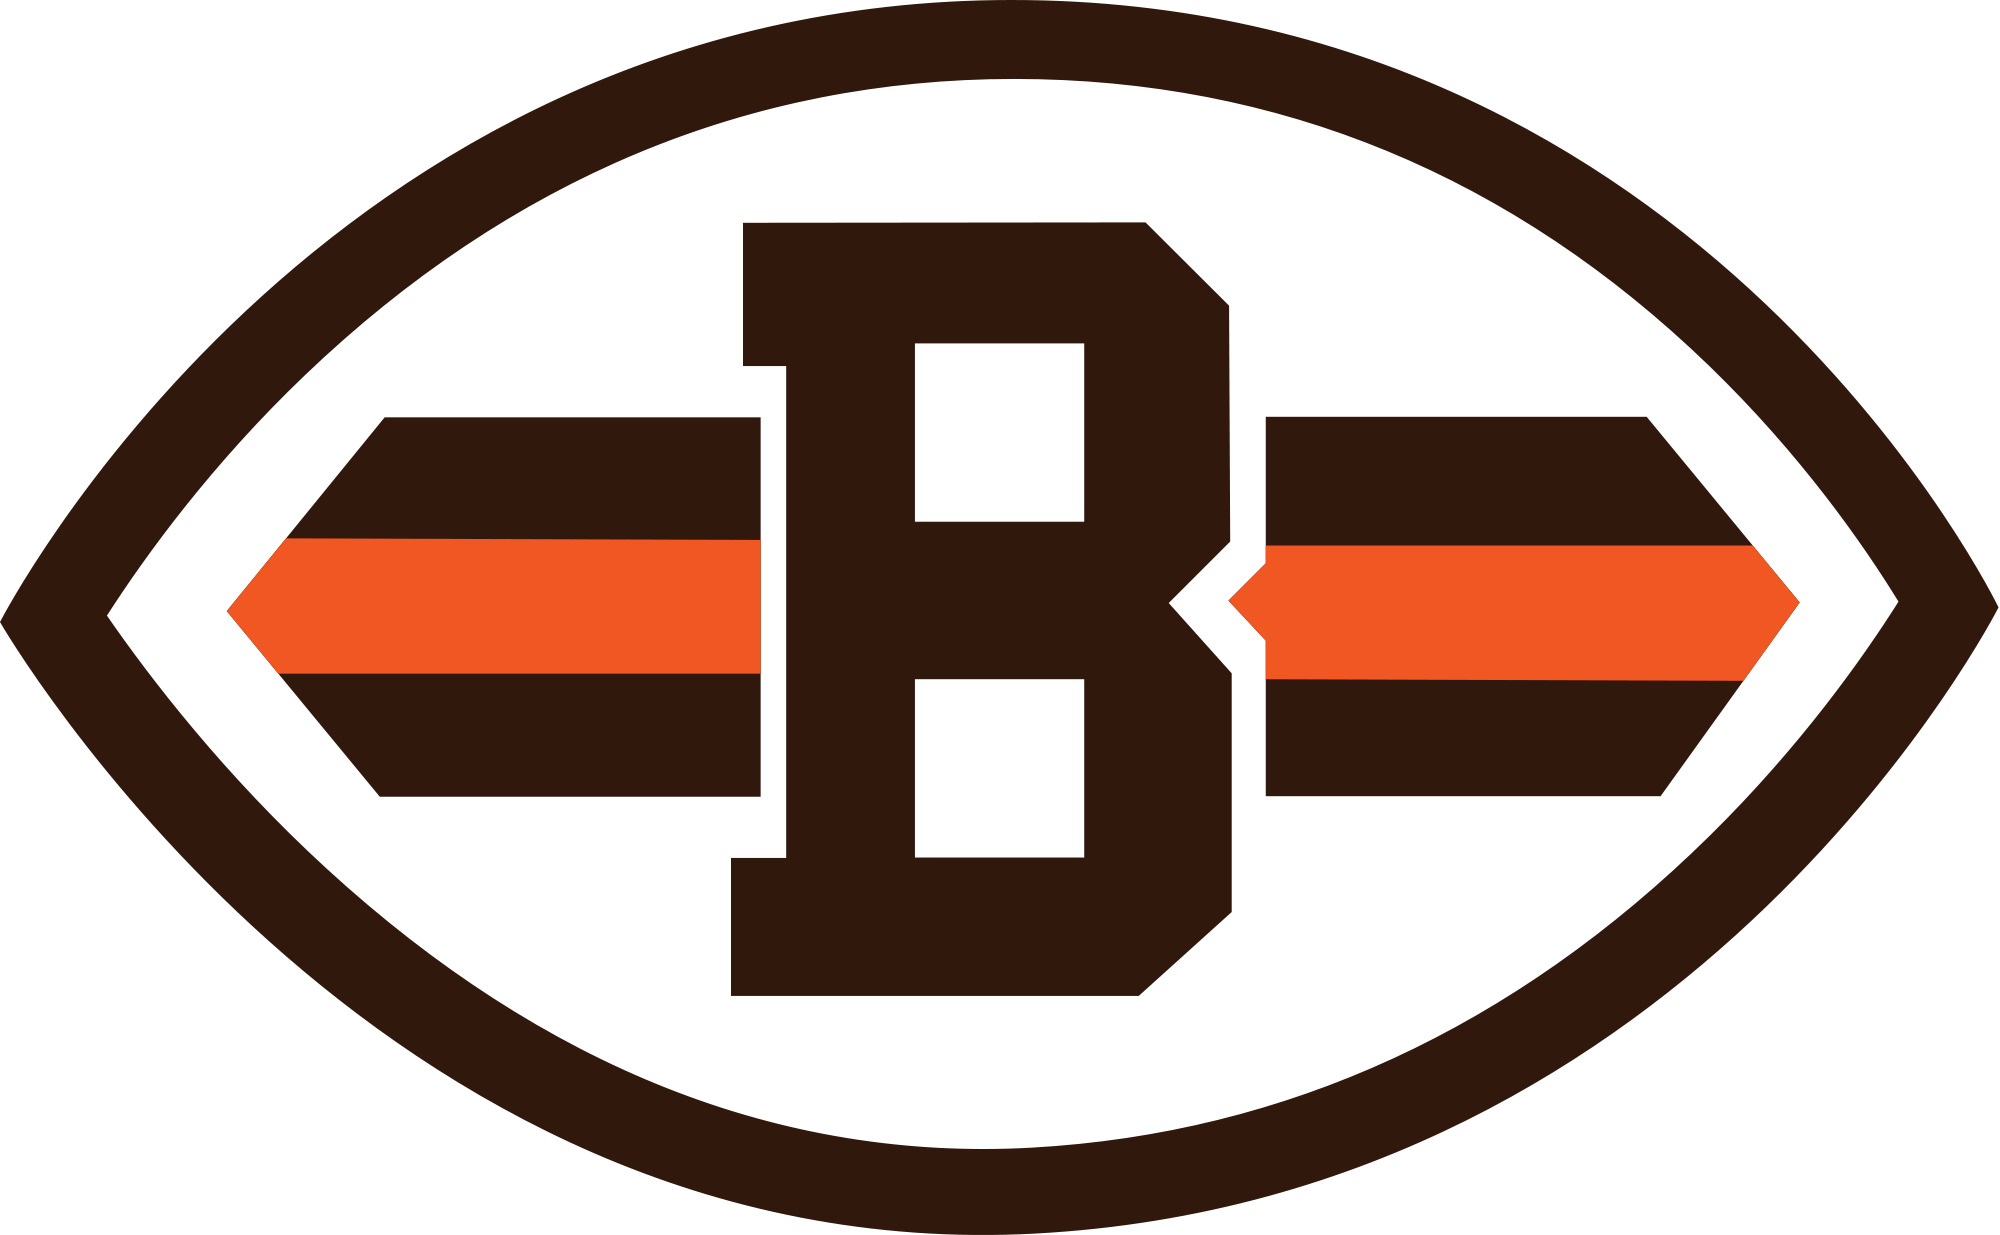 Cleveland Browns Logo icons